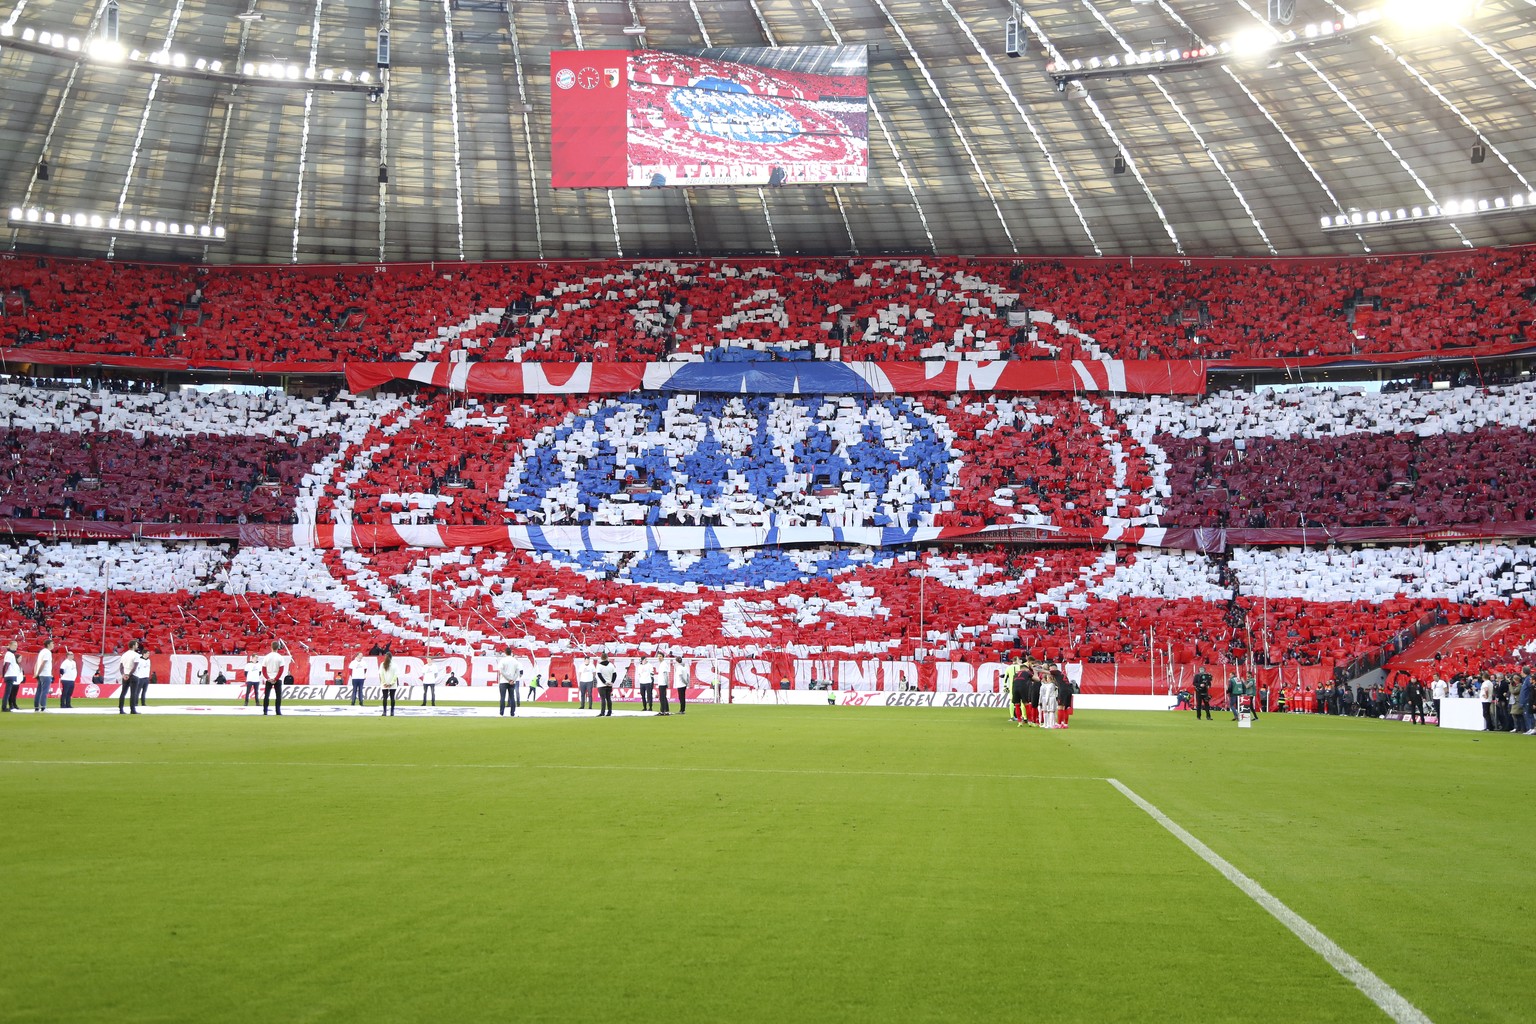 Fans fill the stands before the German Bundesliga soccer match between FC Bayern Munich and FC Augsburg in Munich, Germany, Sunday, March 8, 2020. (AP Photo/Matthias Schrader)